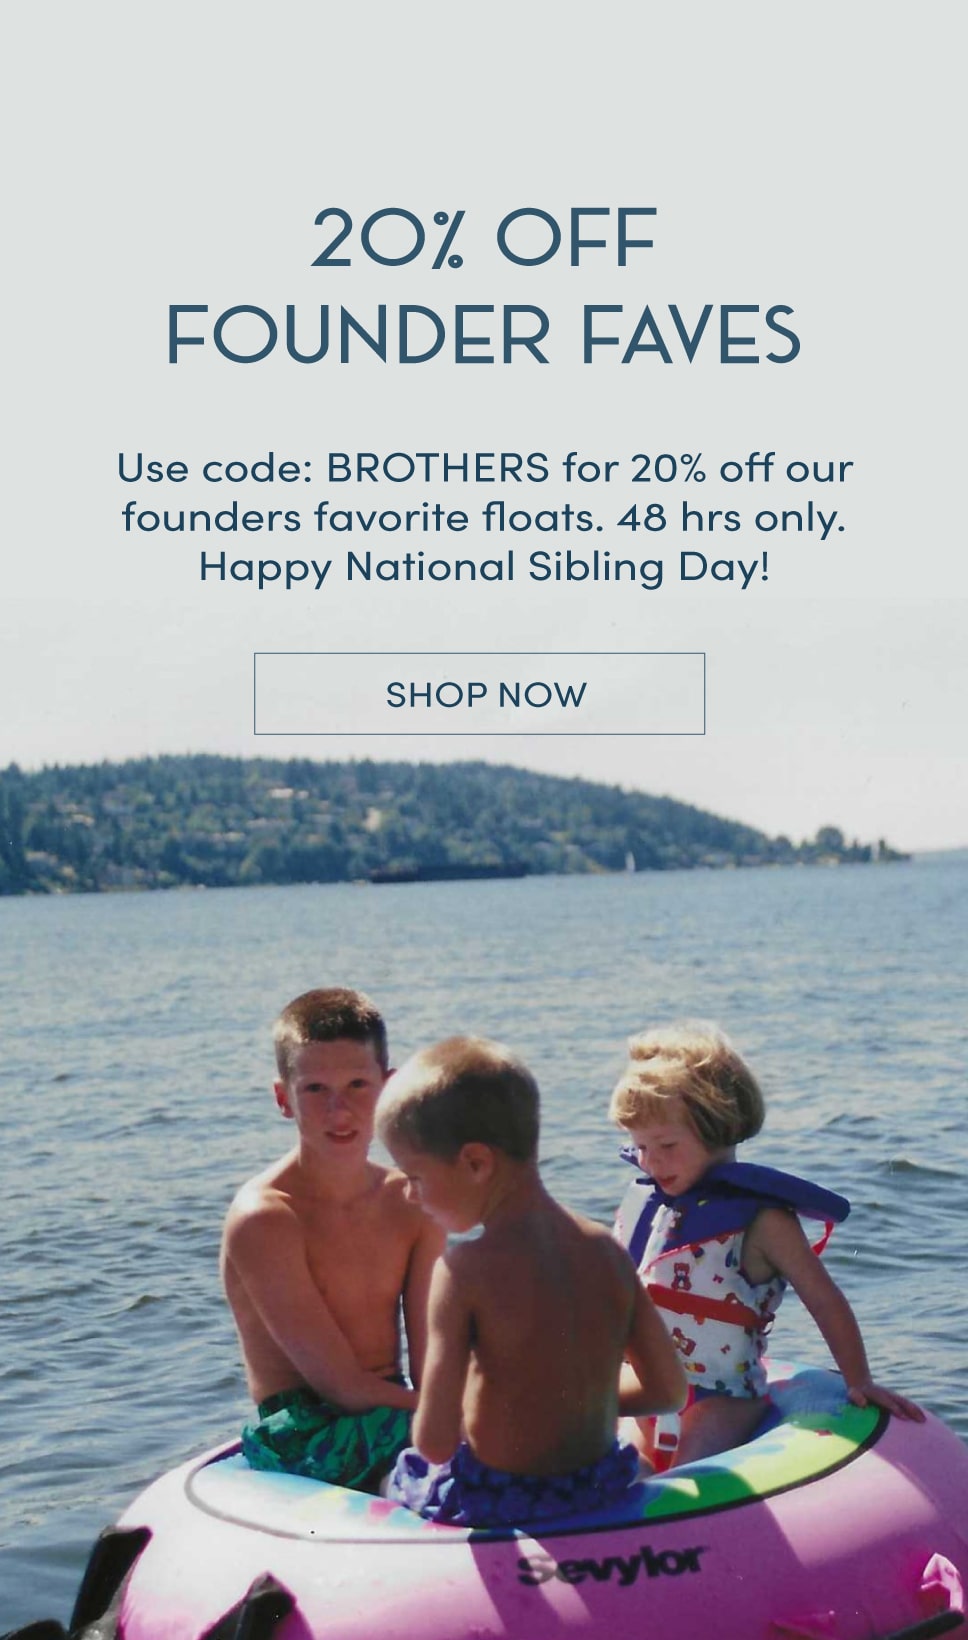 20% off founder faves. Use code brothers for 20% off our founders favorite floats. 48 hours only